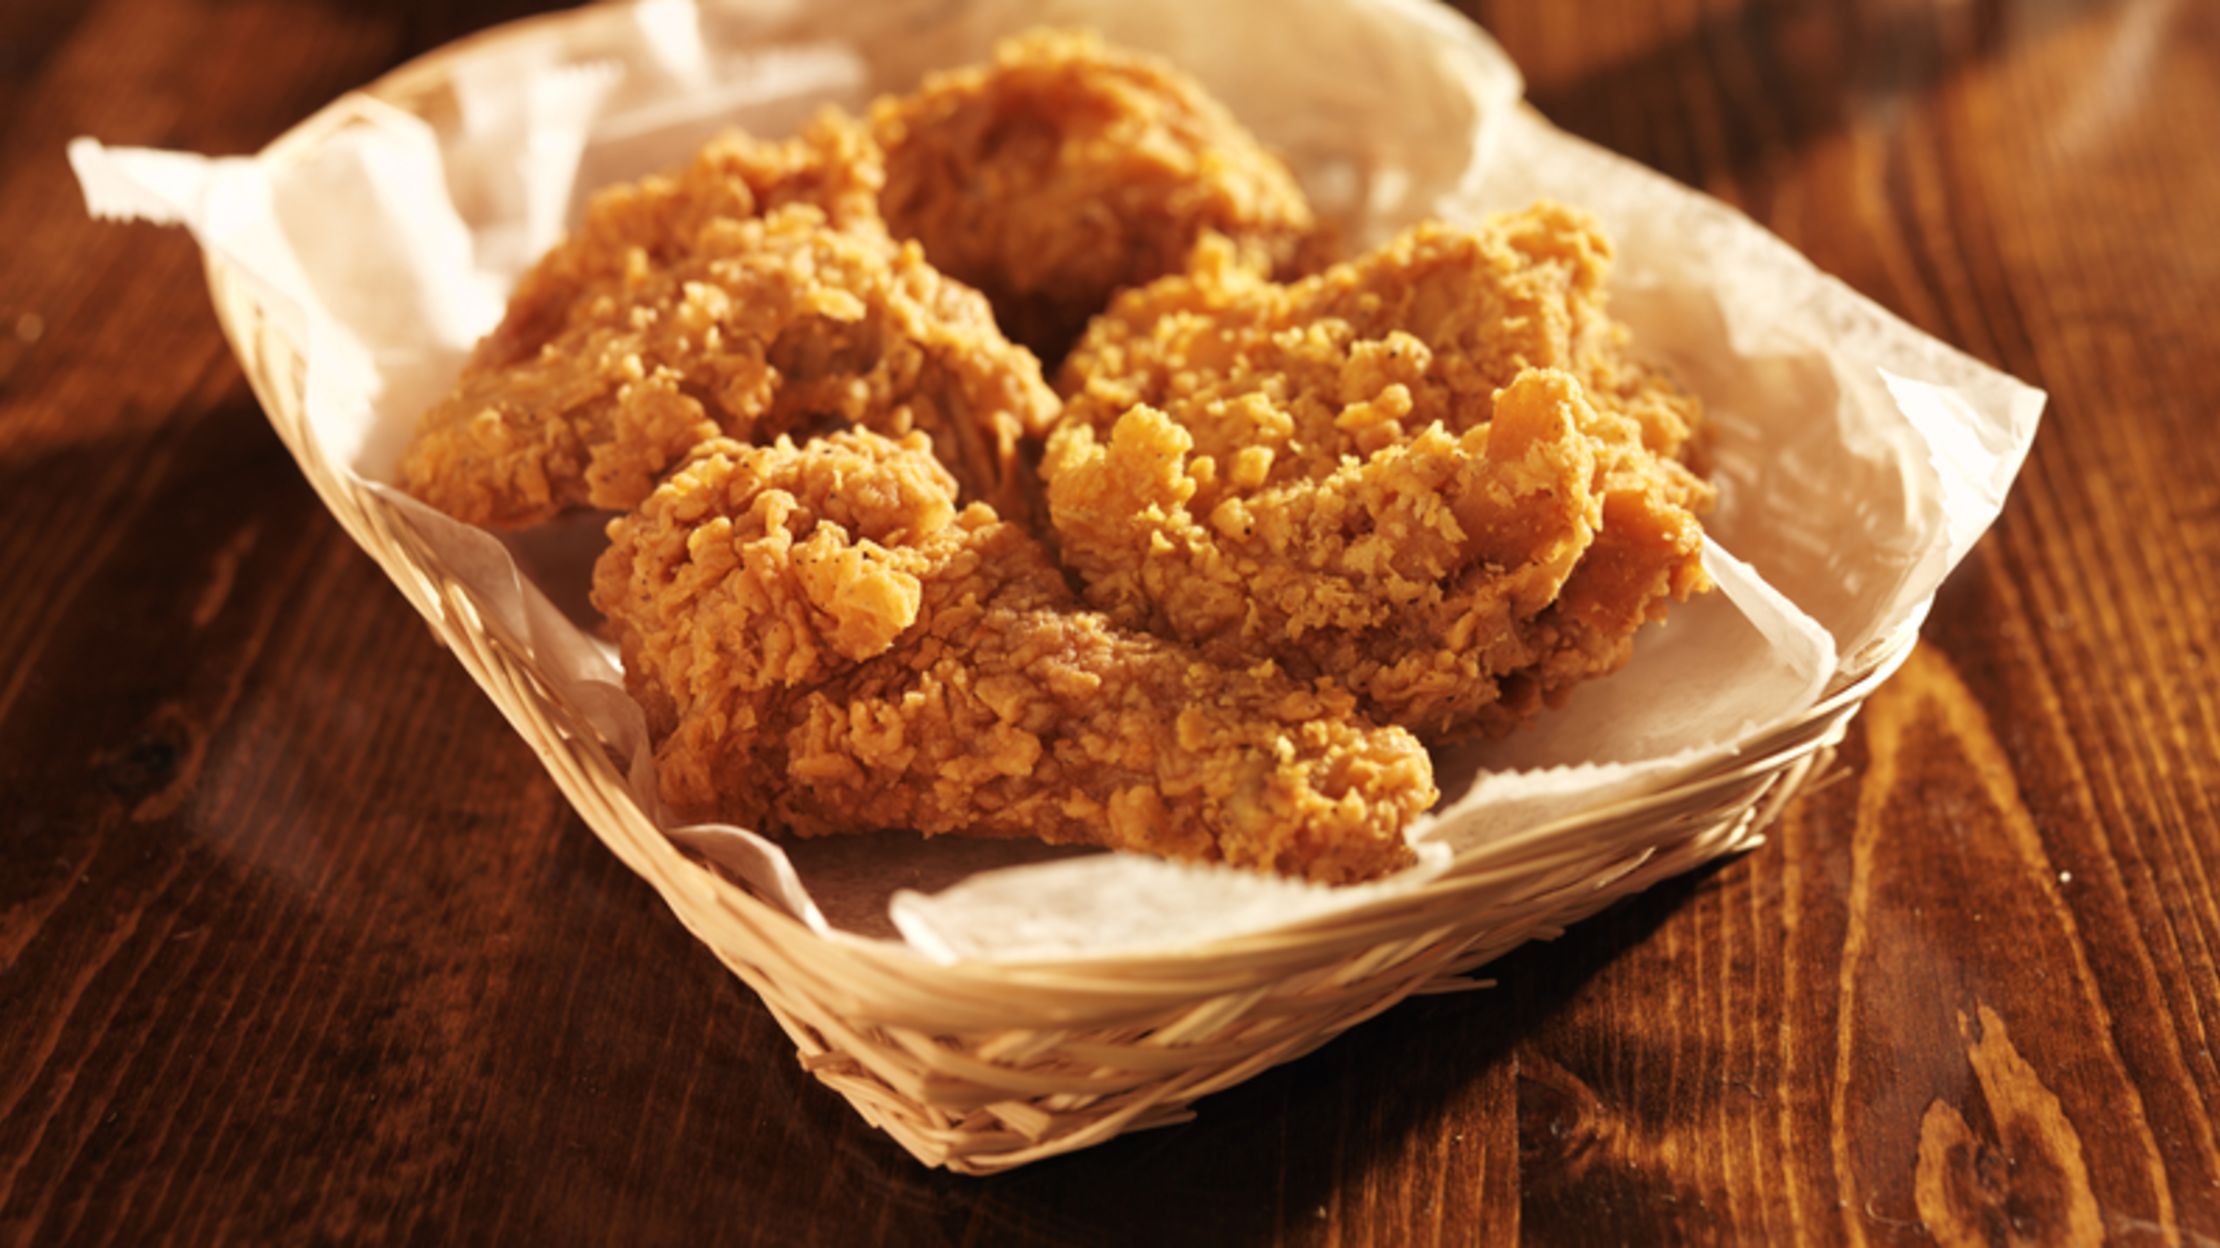 Ohio Fried Chicken Receipe - If It S Sunday In Southeastern Indiana Order The Fried Chicken The New York Times